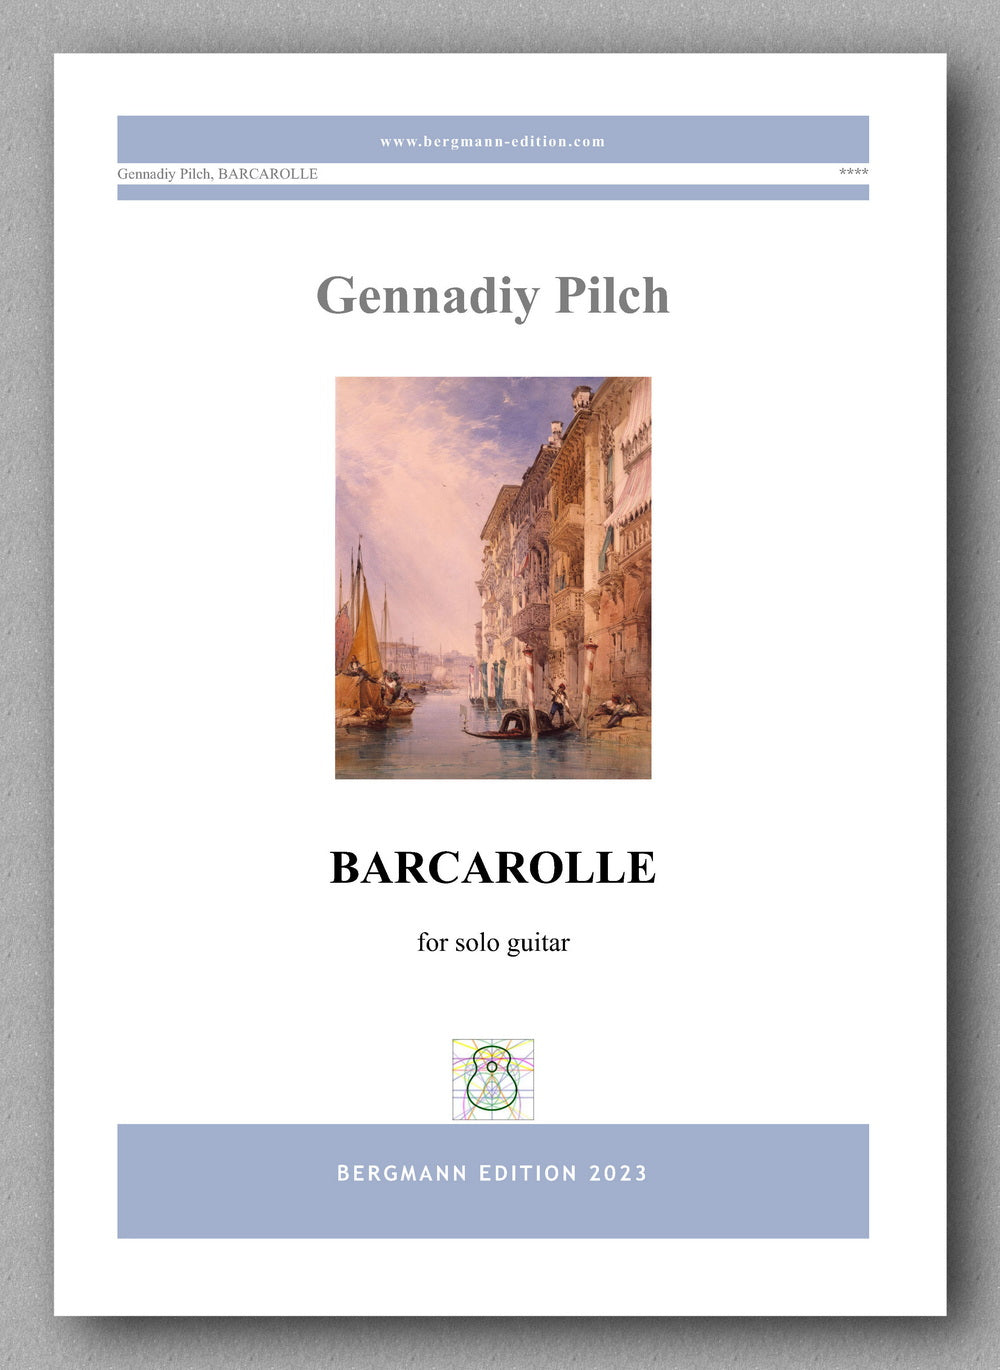 Gennadiy Pilch, Barcarolle - preview of the cover